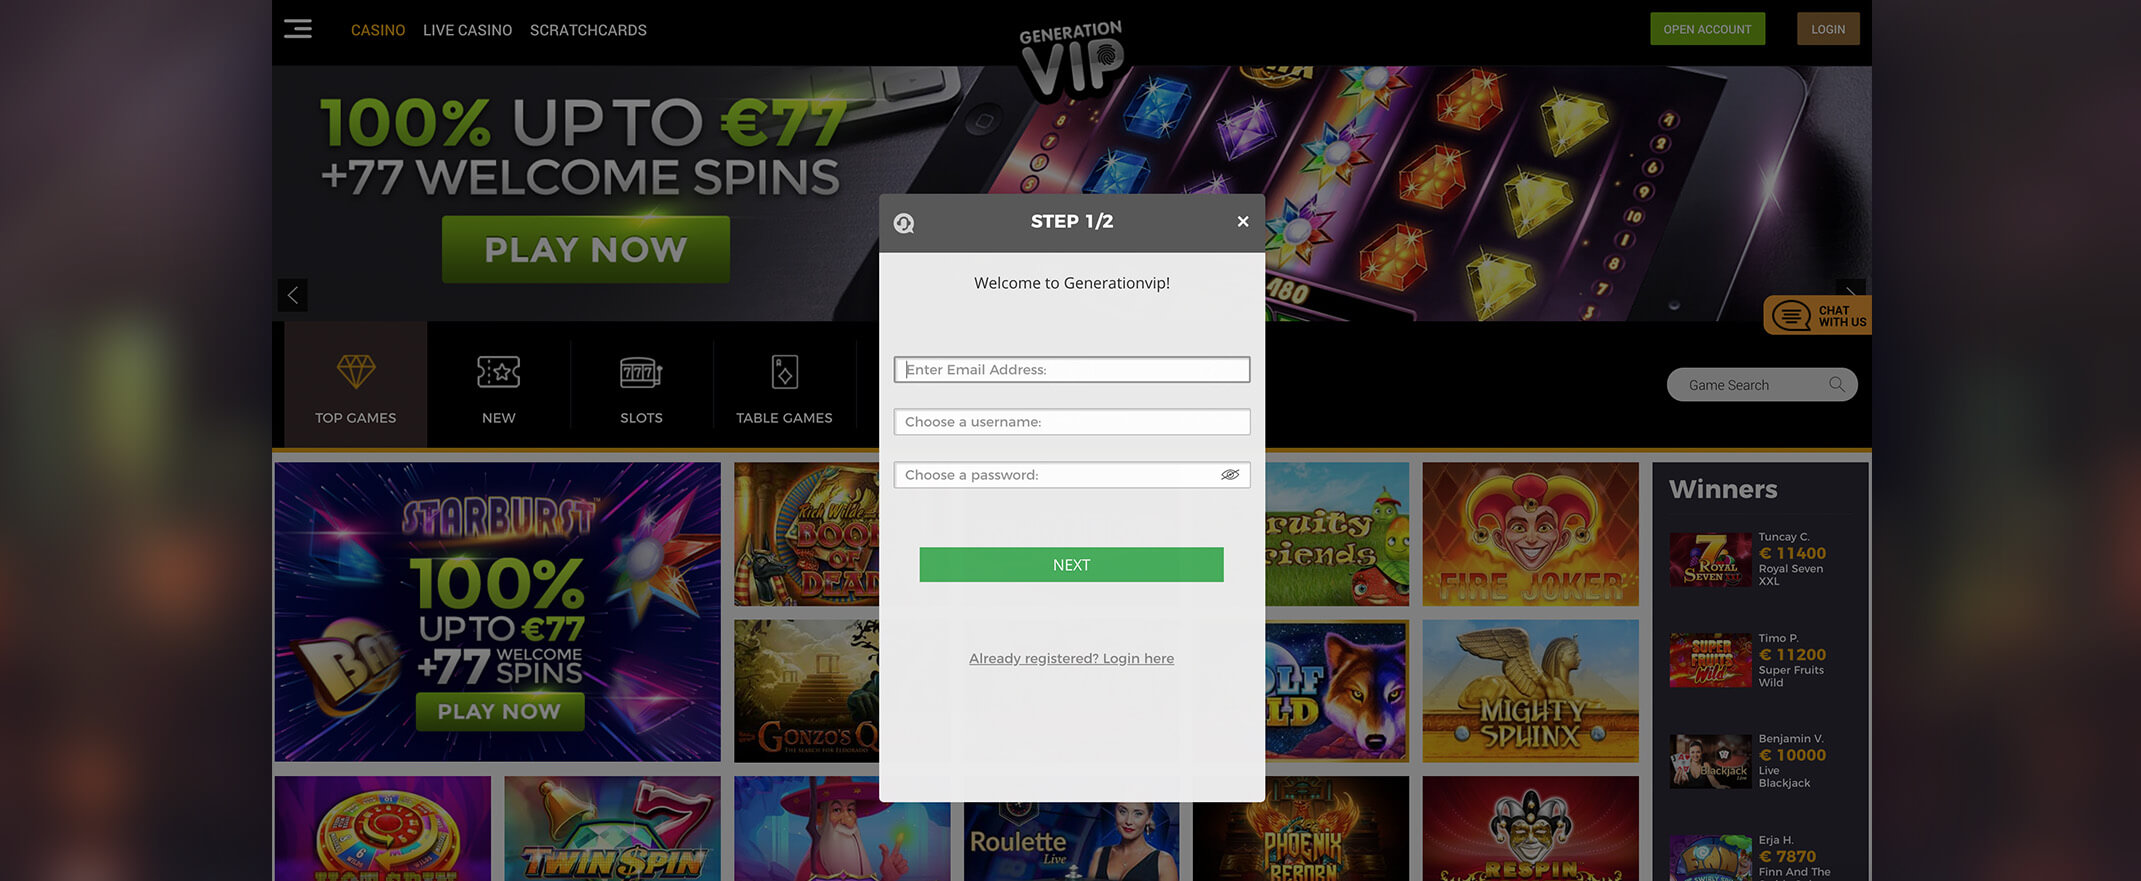 How to open your account at Generation VIP casino